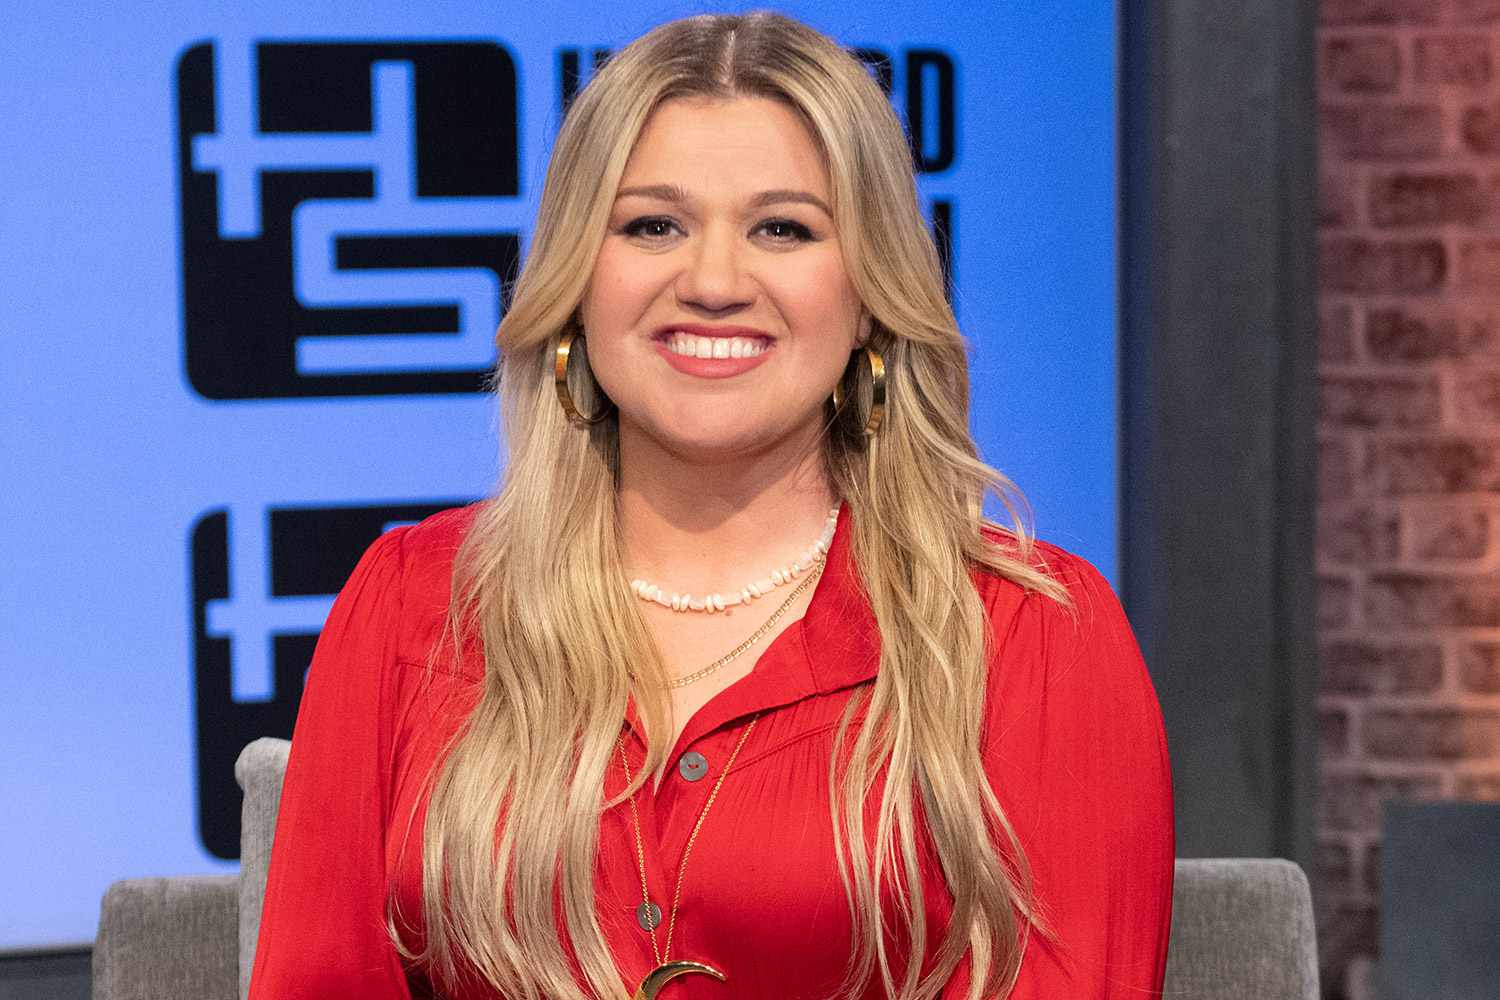 Kelly Clarkson wearing a red outfit